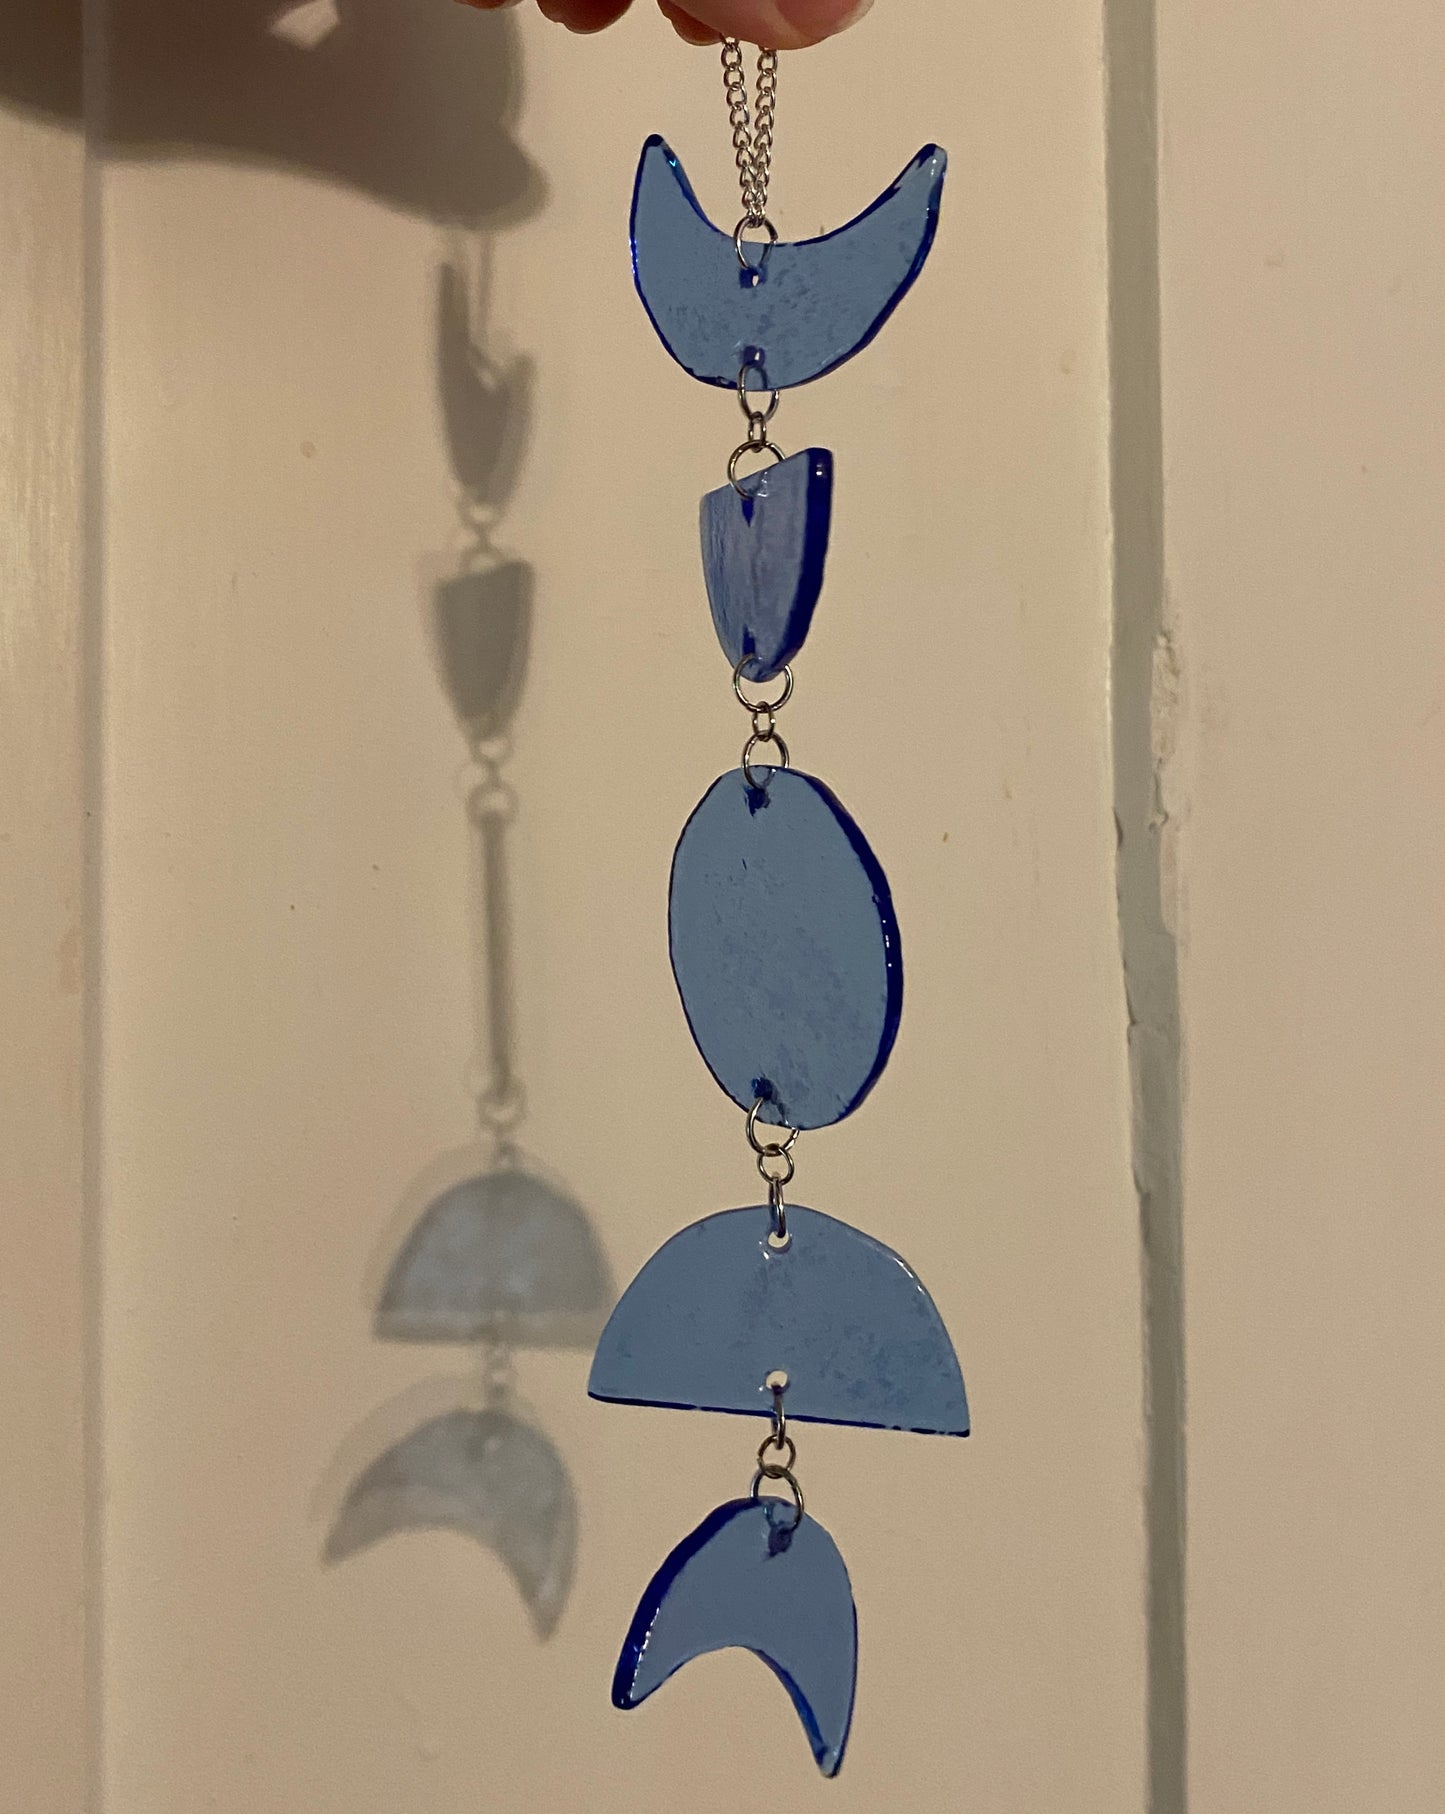 Moon Phases Glass Sun Catcher